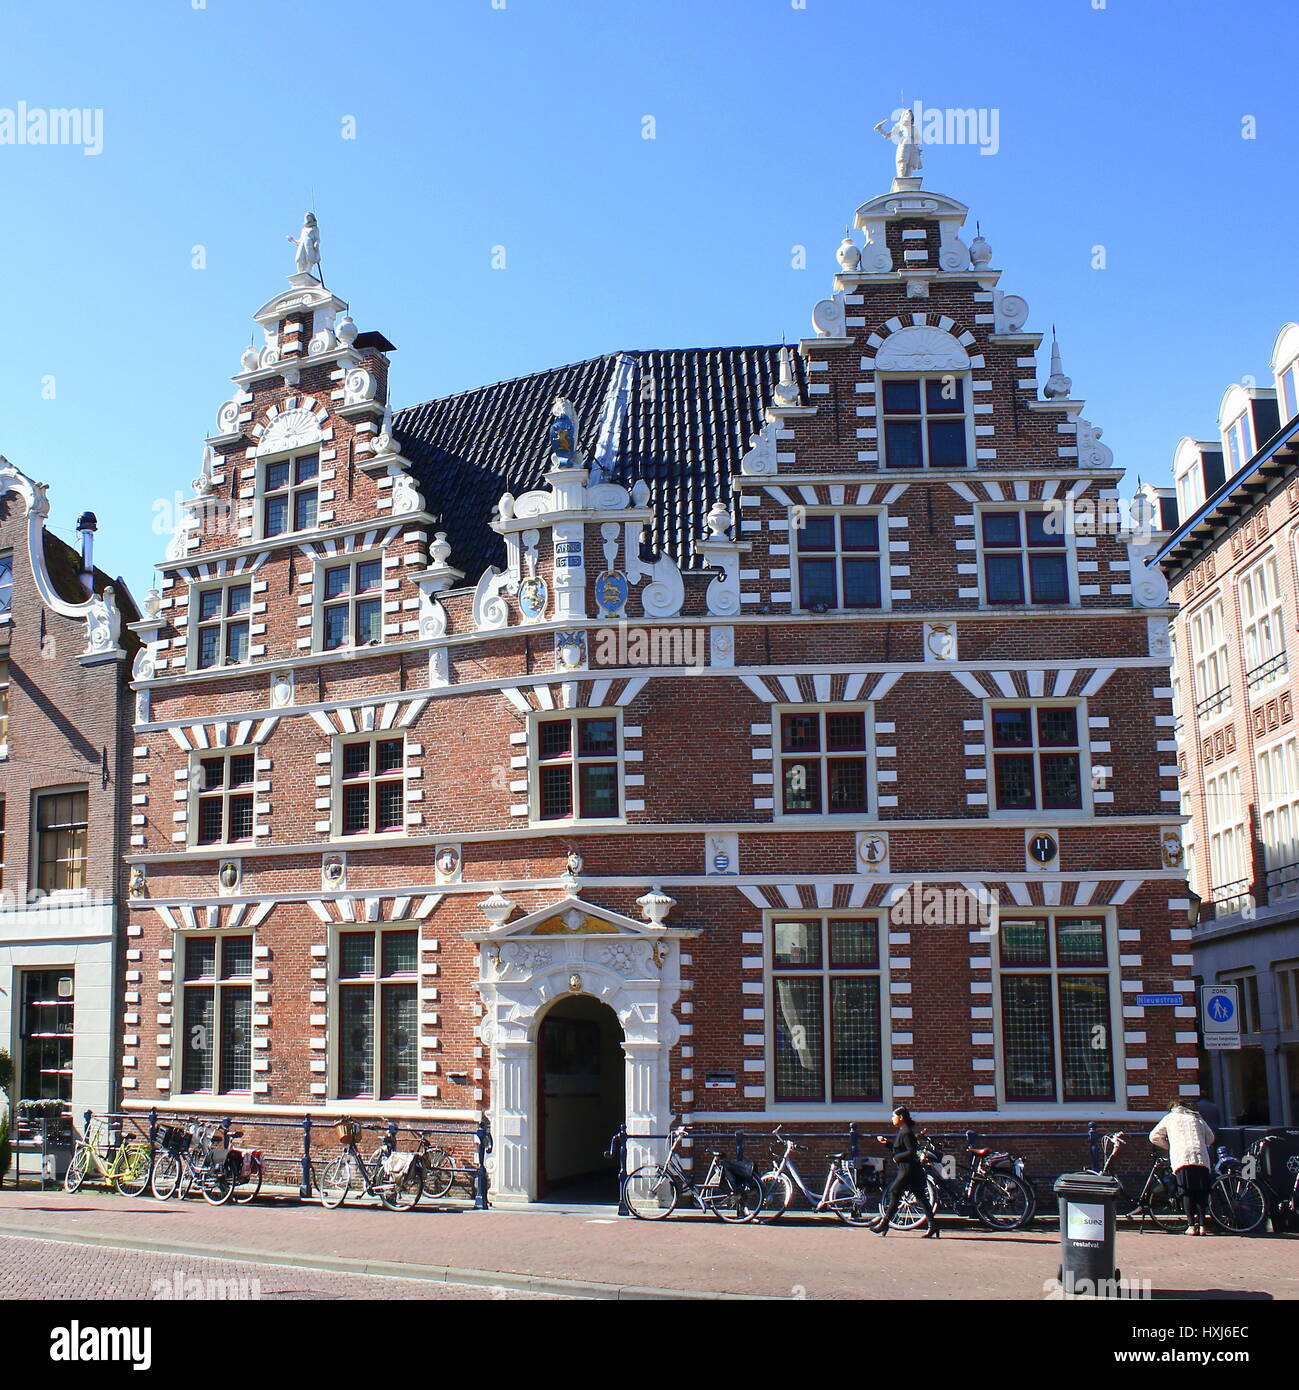 Monumental Statenlogement (1622), former hotel & city hall (until 1977) in Hoorn, Noord-Holland, Netherlands. Renowned for double crow stepped gables Stock Photo